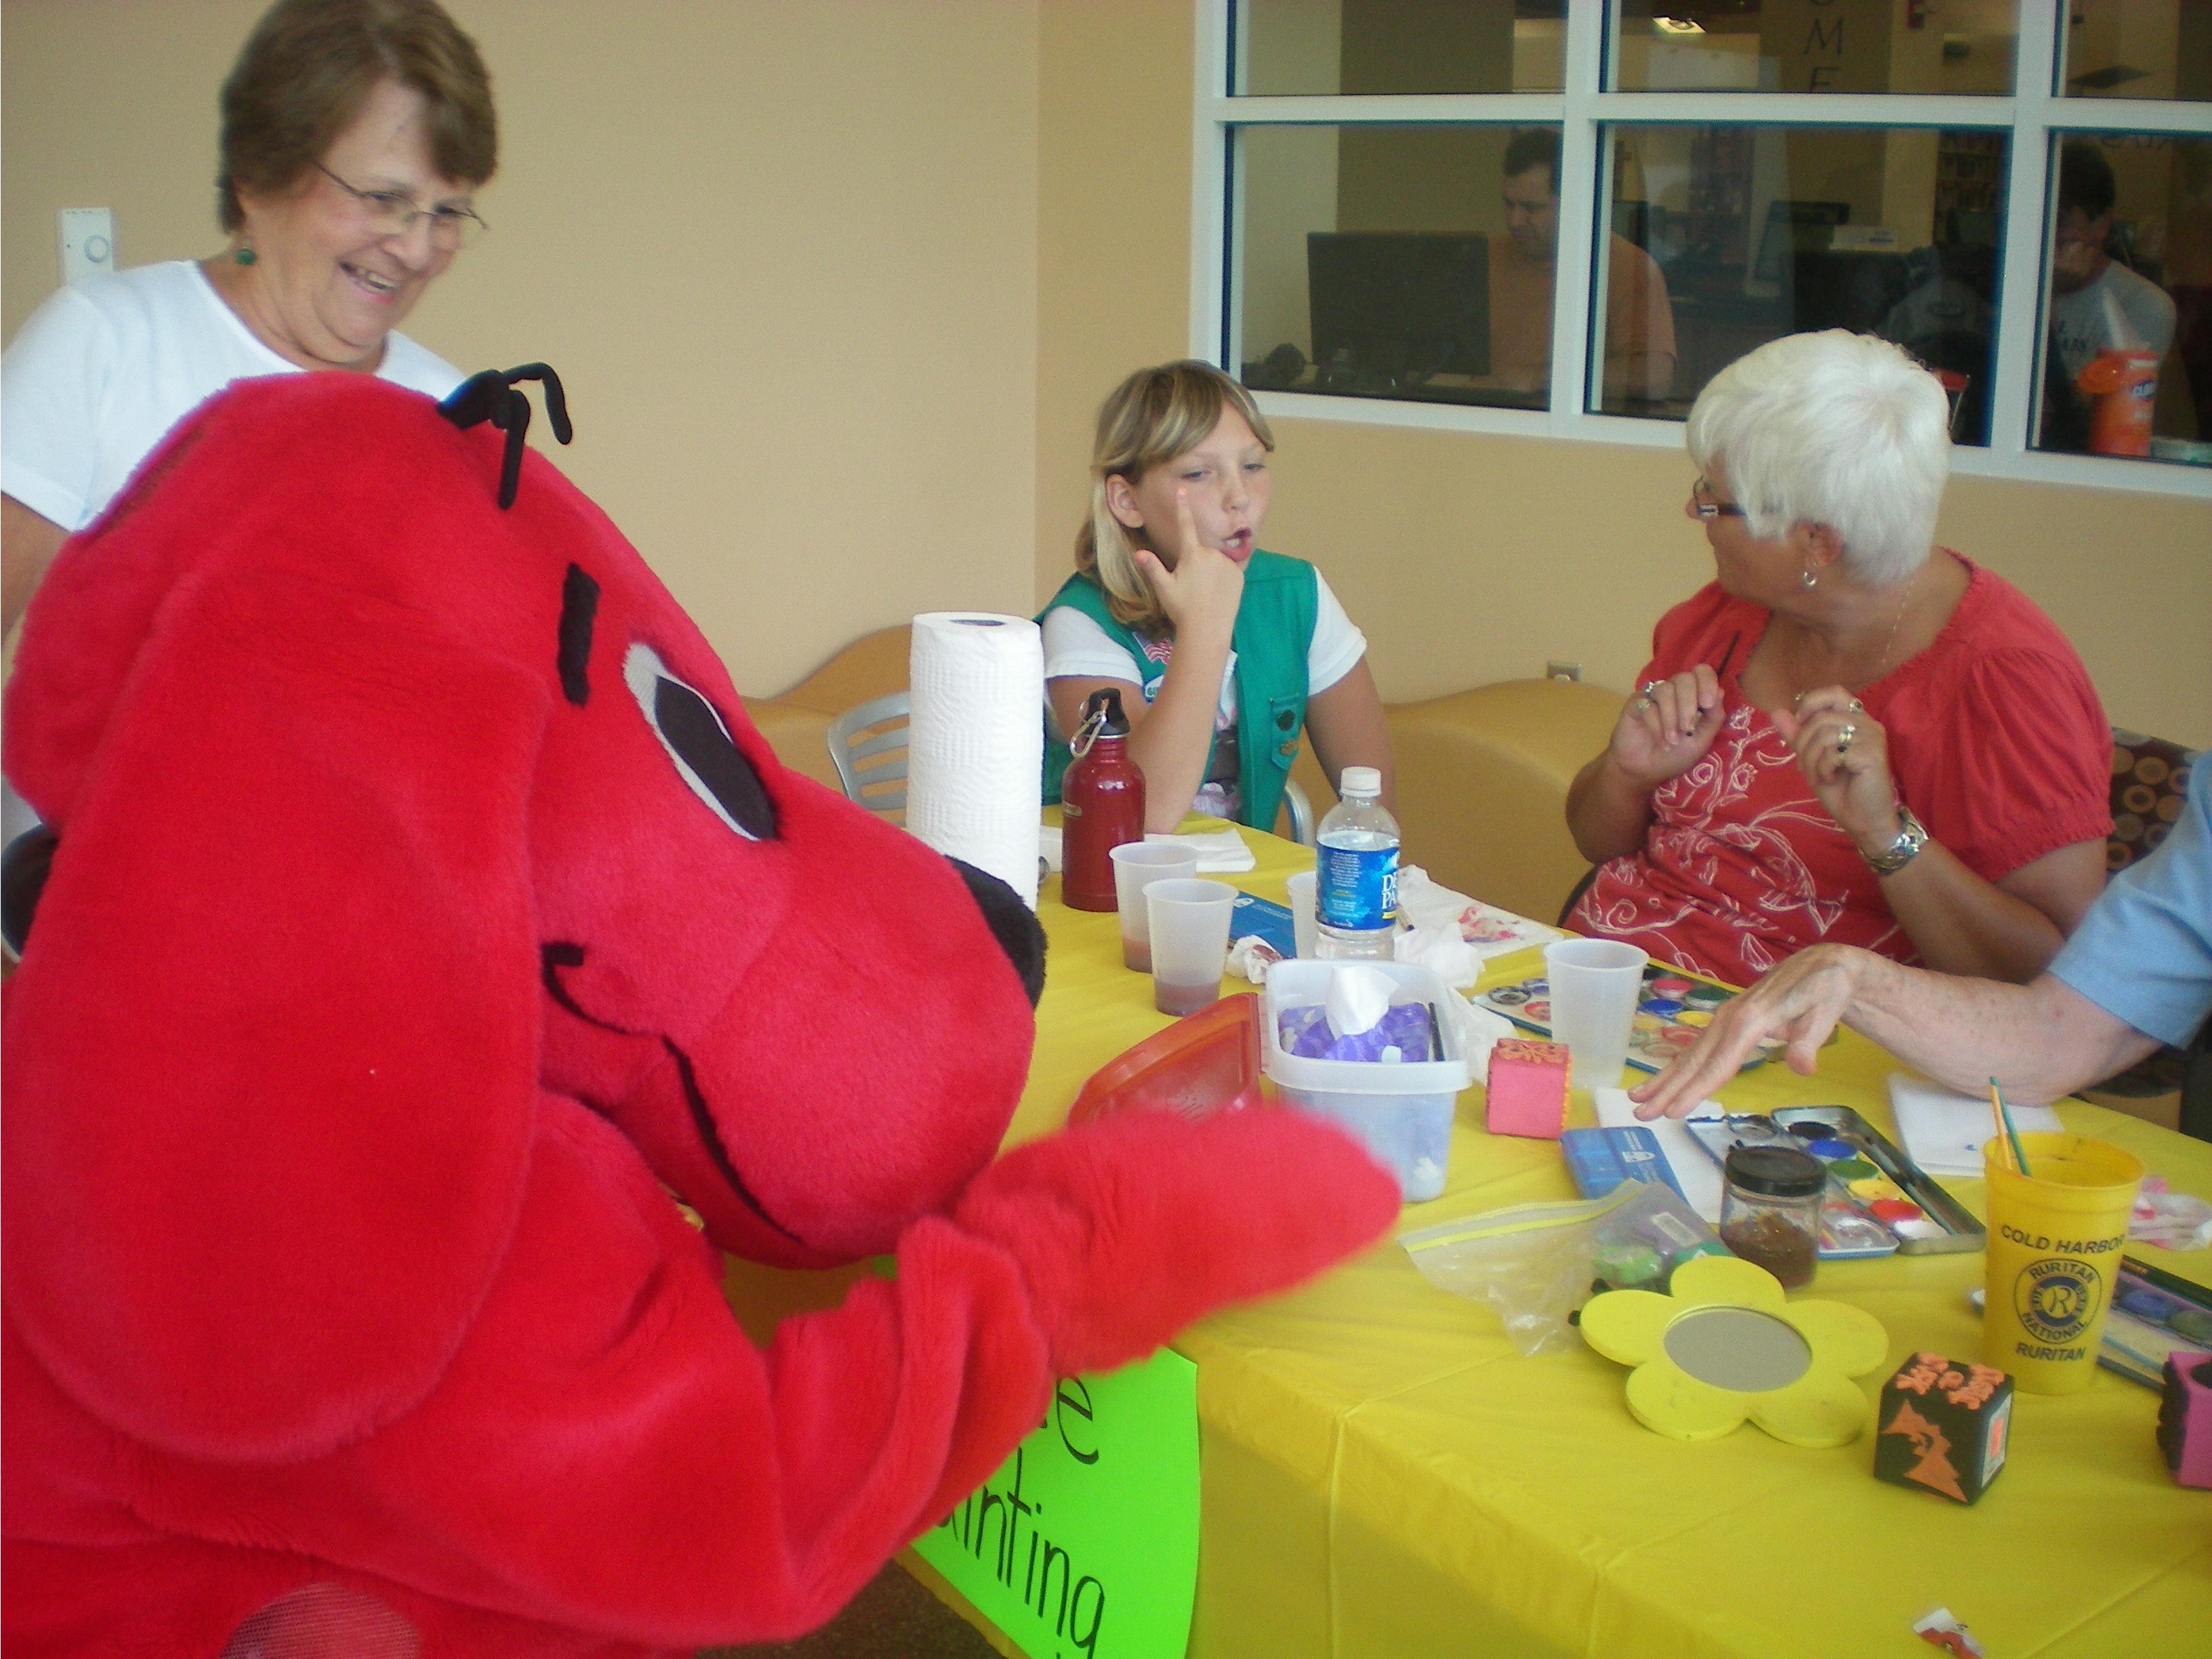 Clifford the Big Red Dog visited the face-painting station during the Pamunkey Library's annual Back to School Celebration for preschoolers. A school bus is on-site during the program and the little kids love to get on board for the first time and ride around the library.